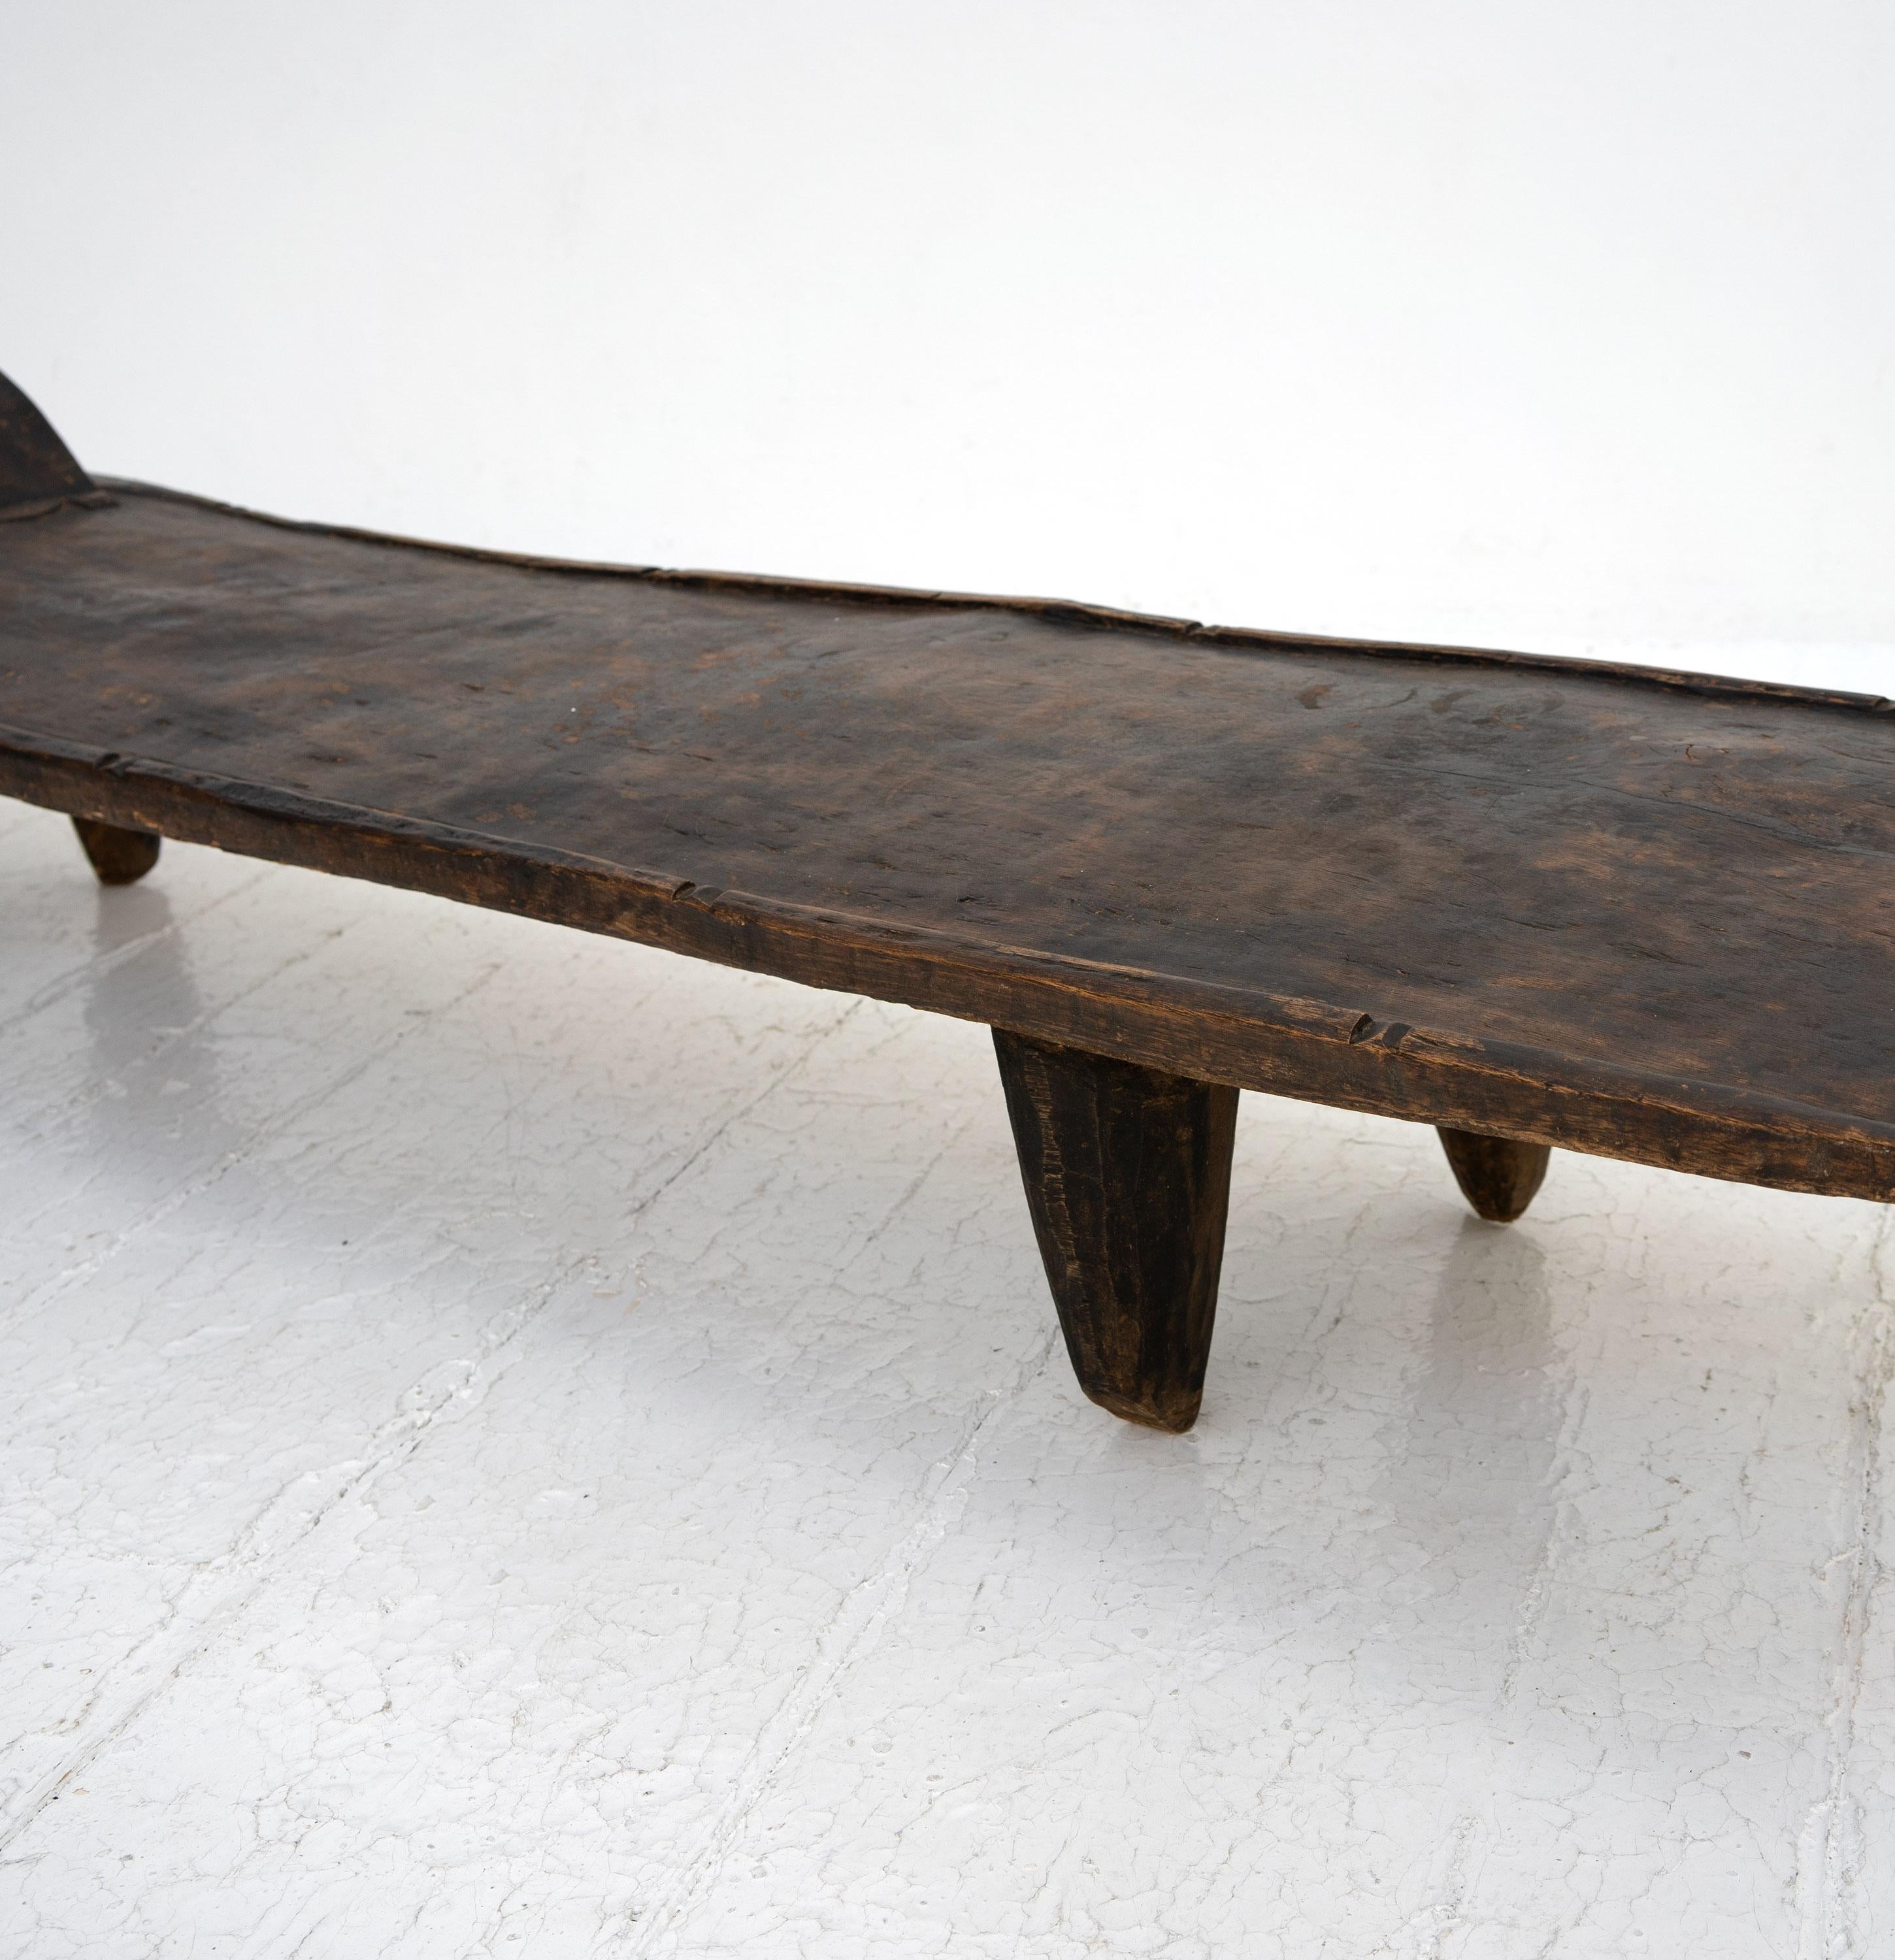 A 20th Century Senufo birthing table carved from one piece of African hardwood by the Senufo people of Côte d'Ivoire, West Africa.

Dimensions (cm, approx):
Height: 27
Width: 203
Depth: 42
